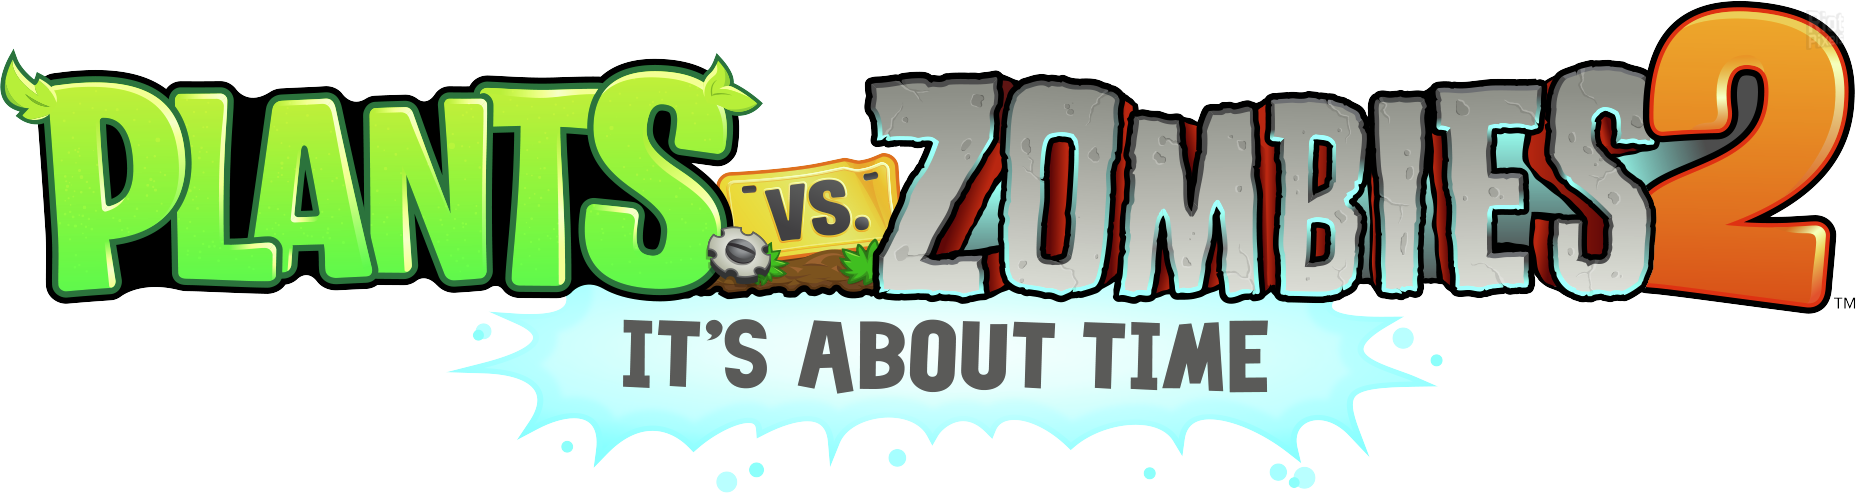 Plants vs Zombies 2: Its about time #19 